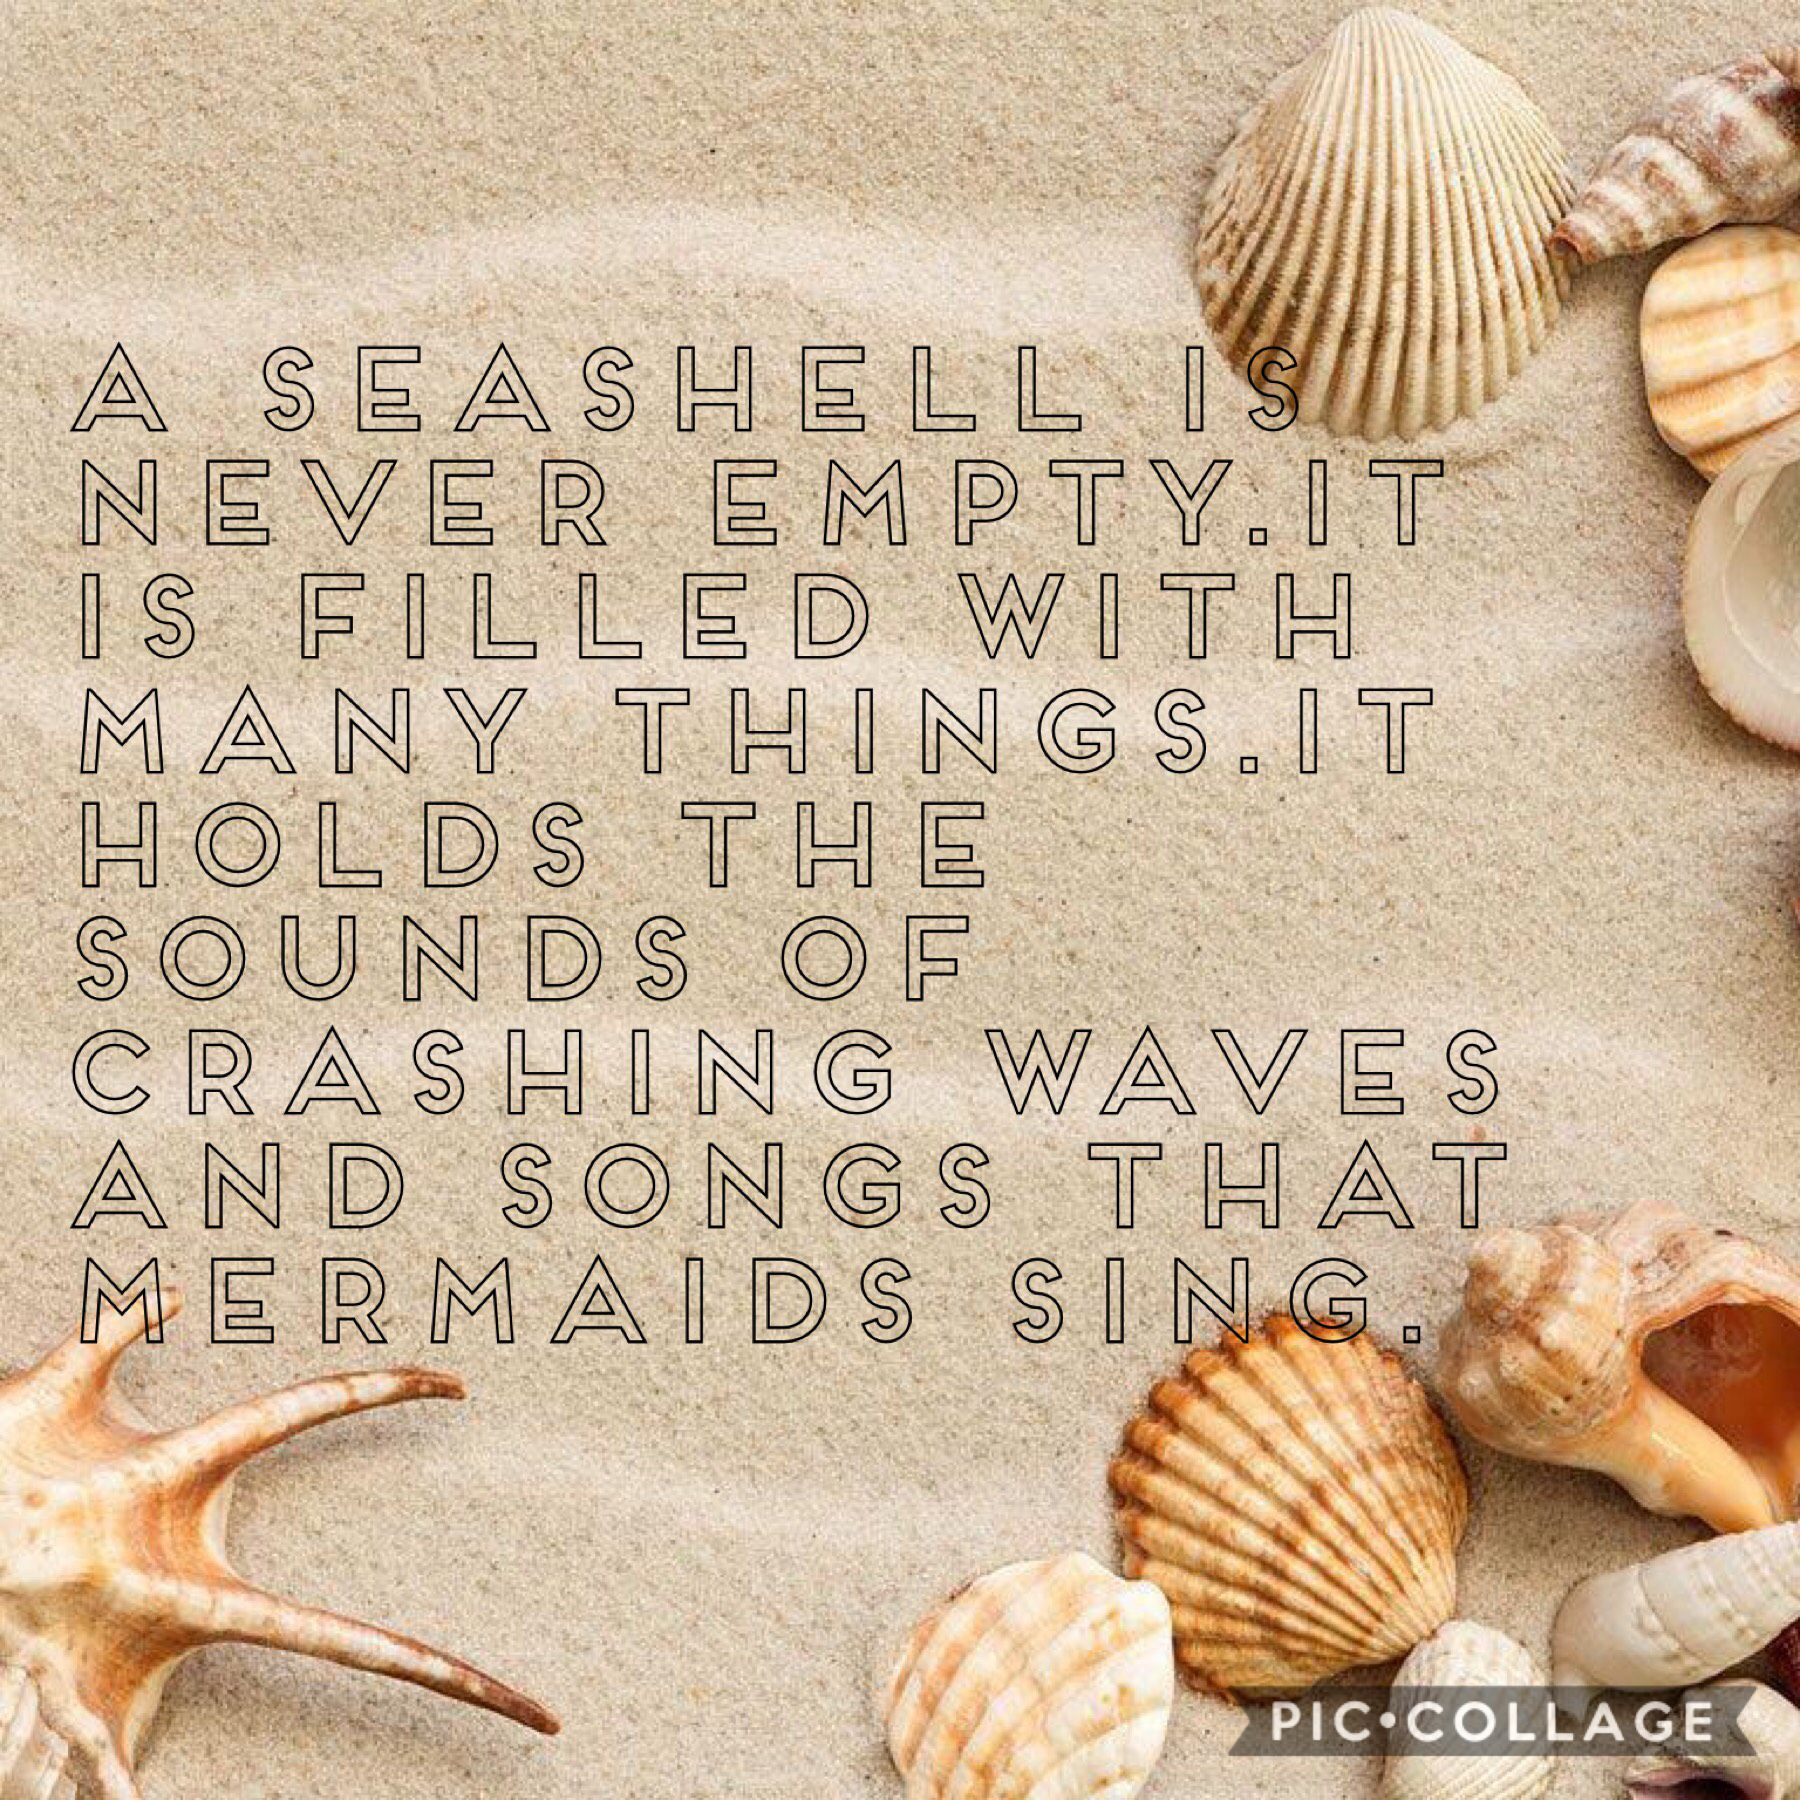 A sea shell is never empty!